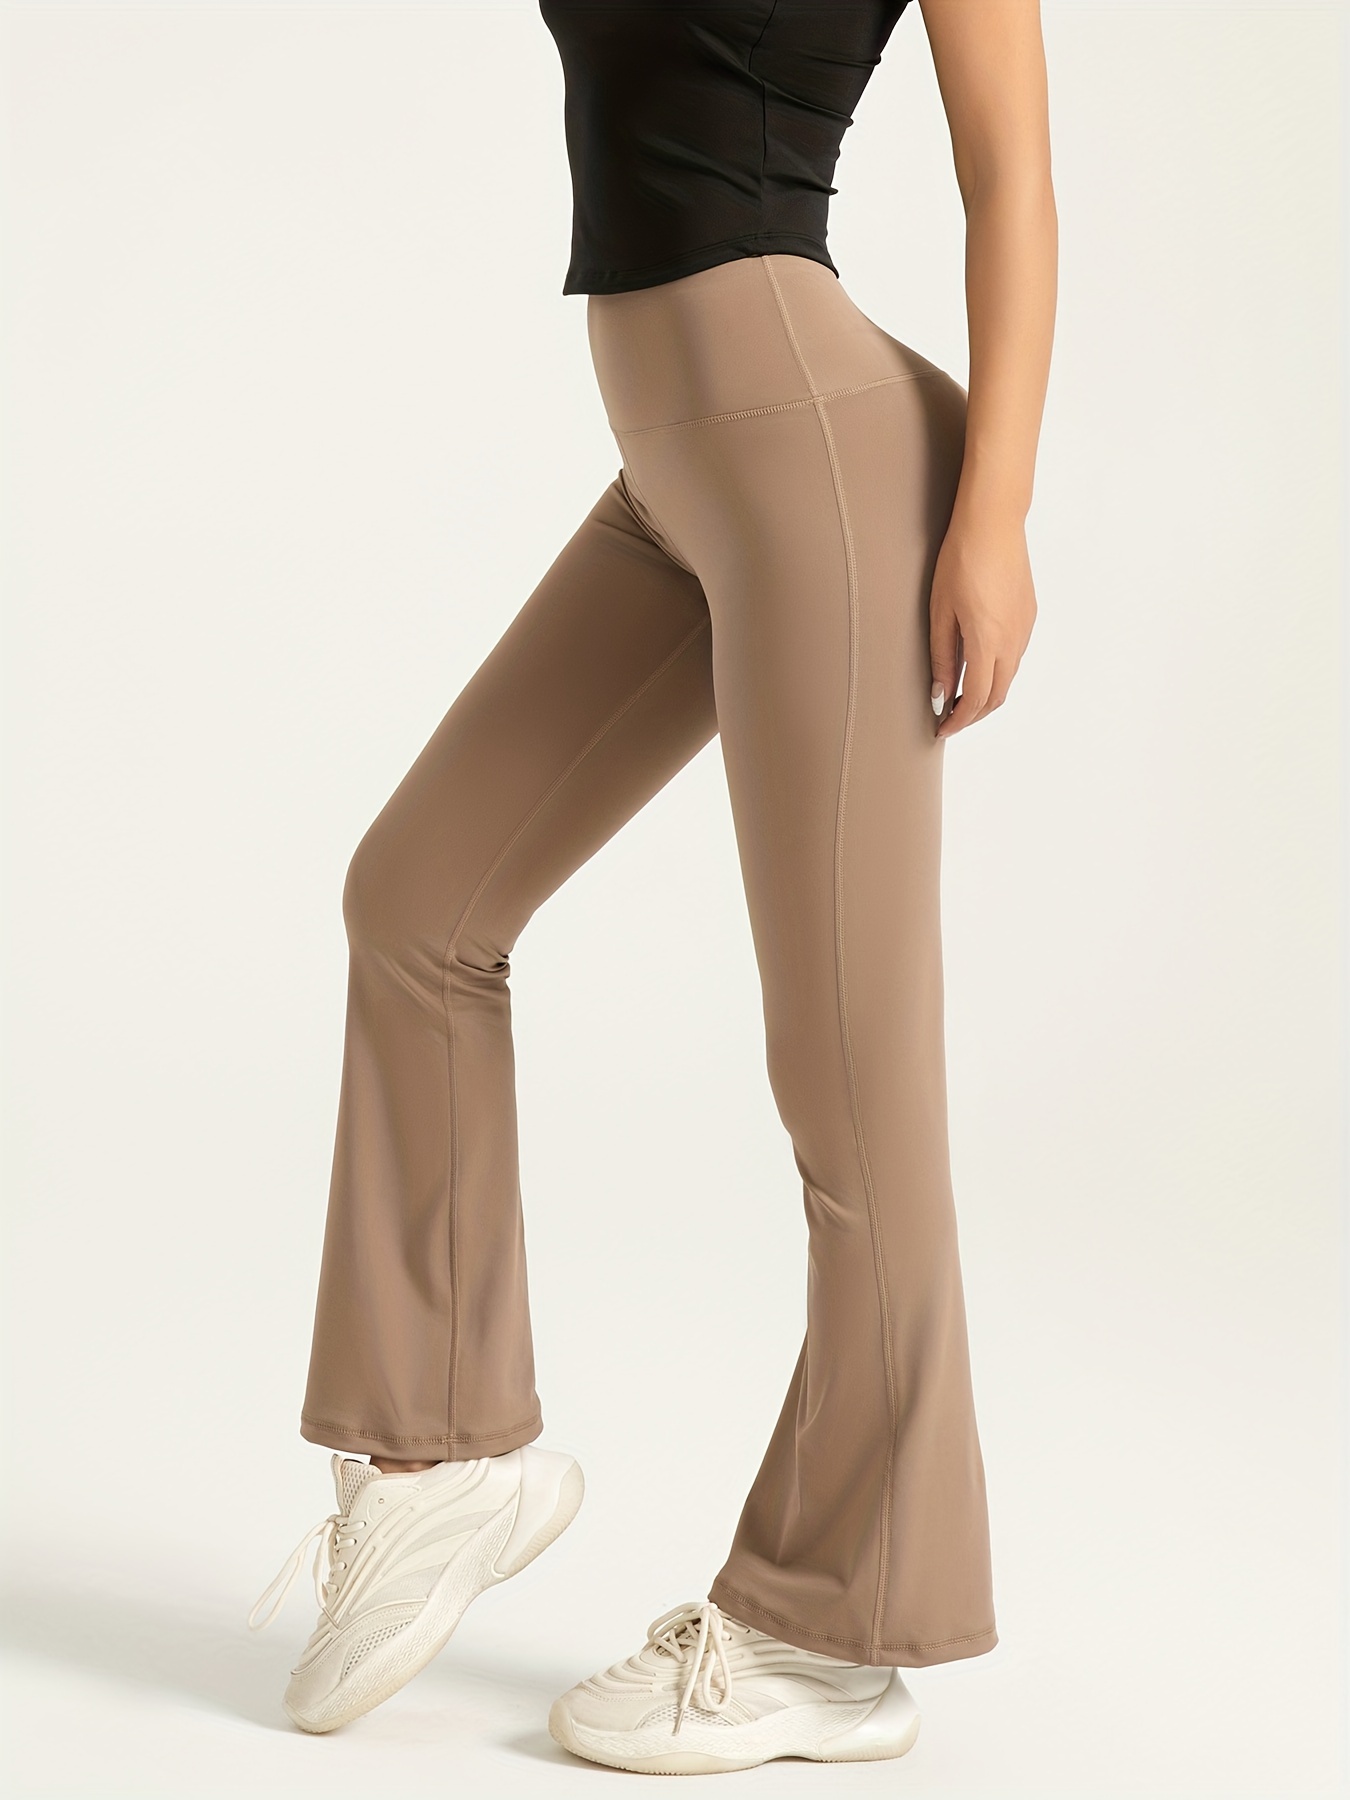 Long Flare Leggings for Women Tall Brown Ladies Solid Color High